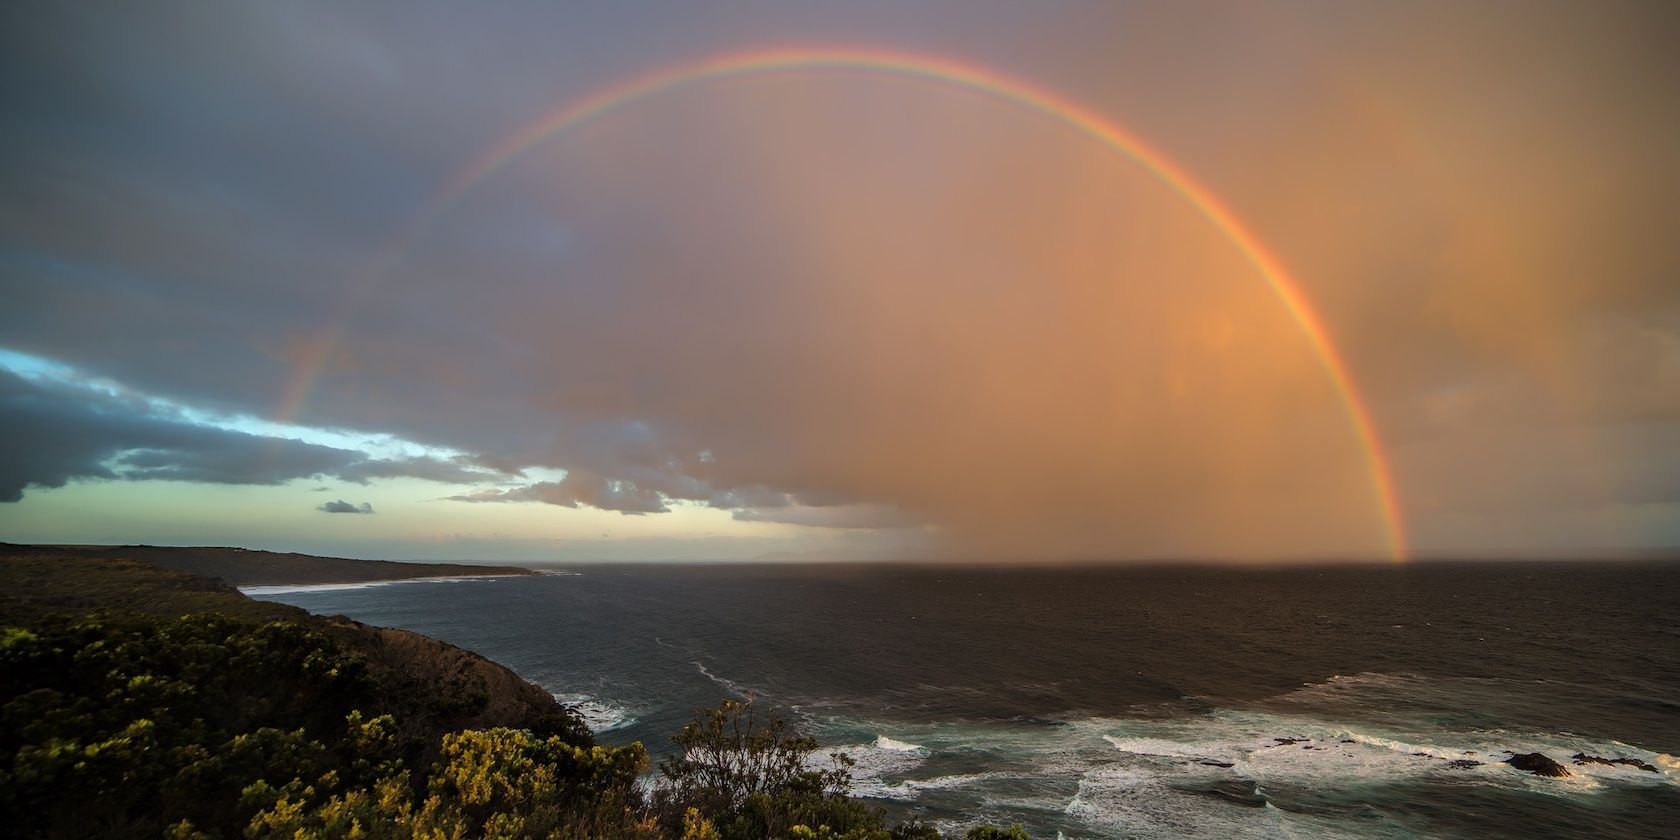 How to Take Beautiful Photographs of Rainbows: 10 Easy Tips